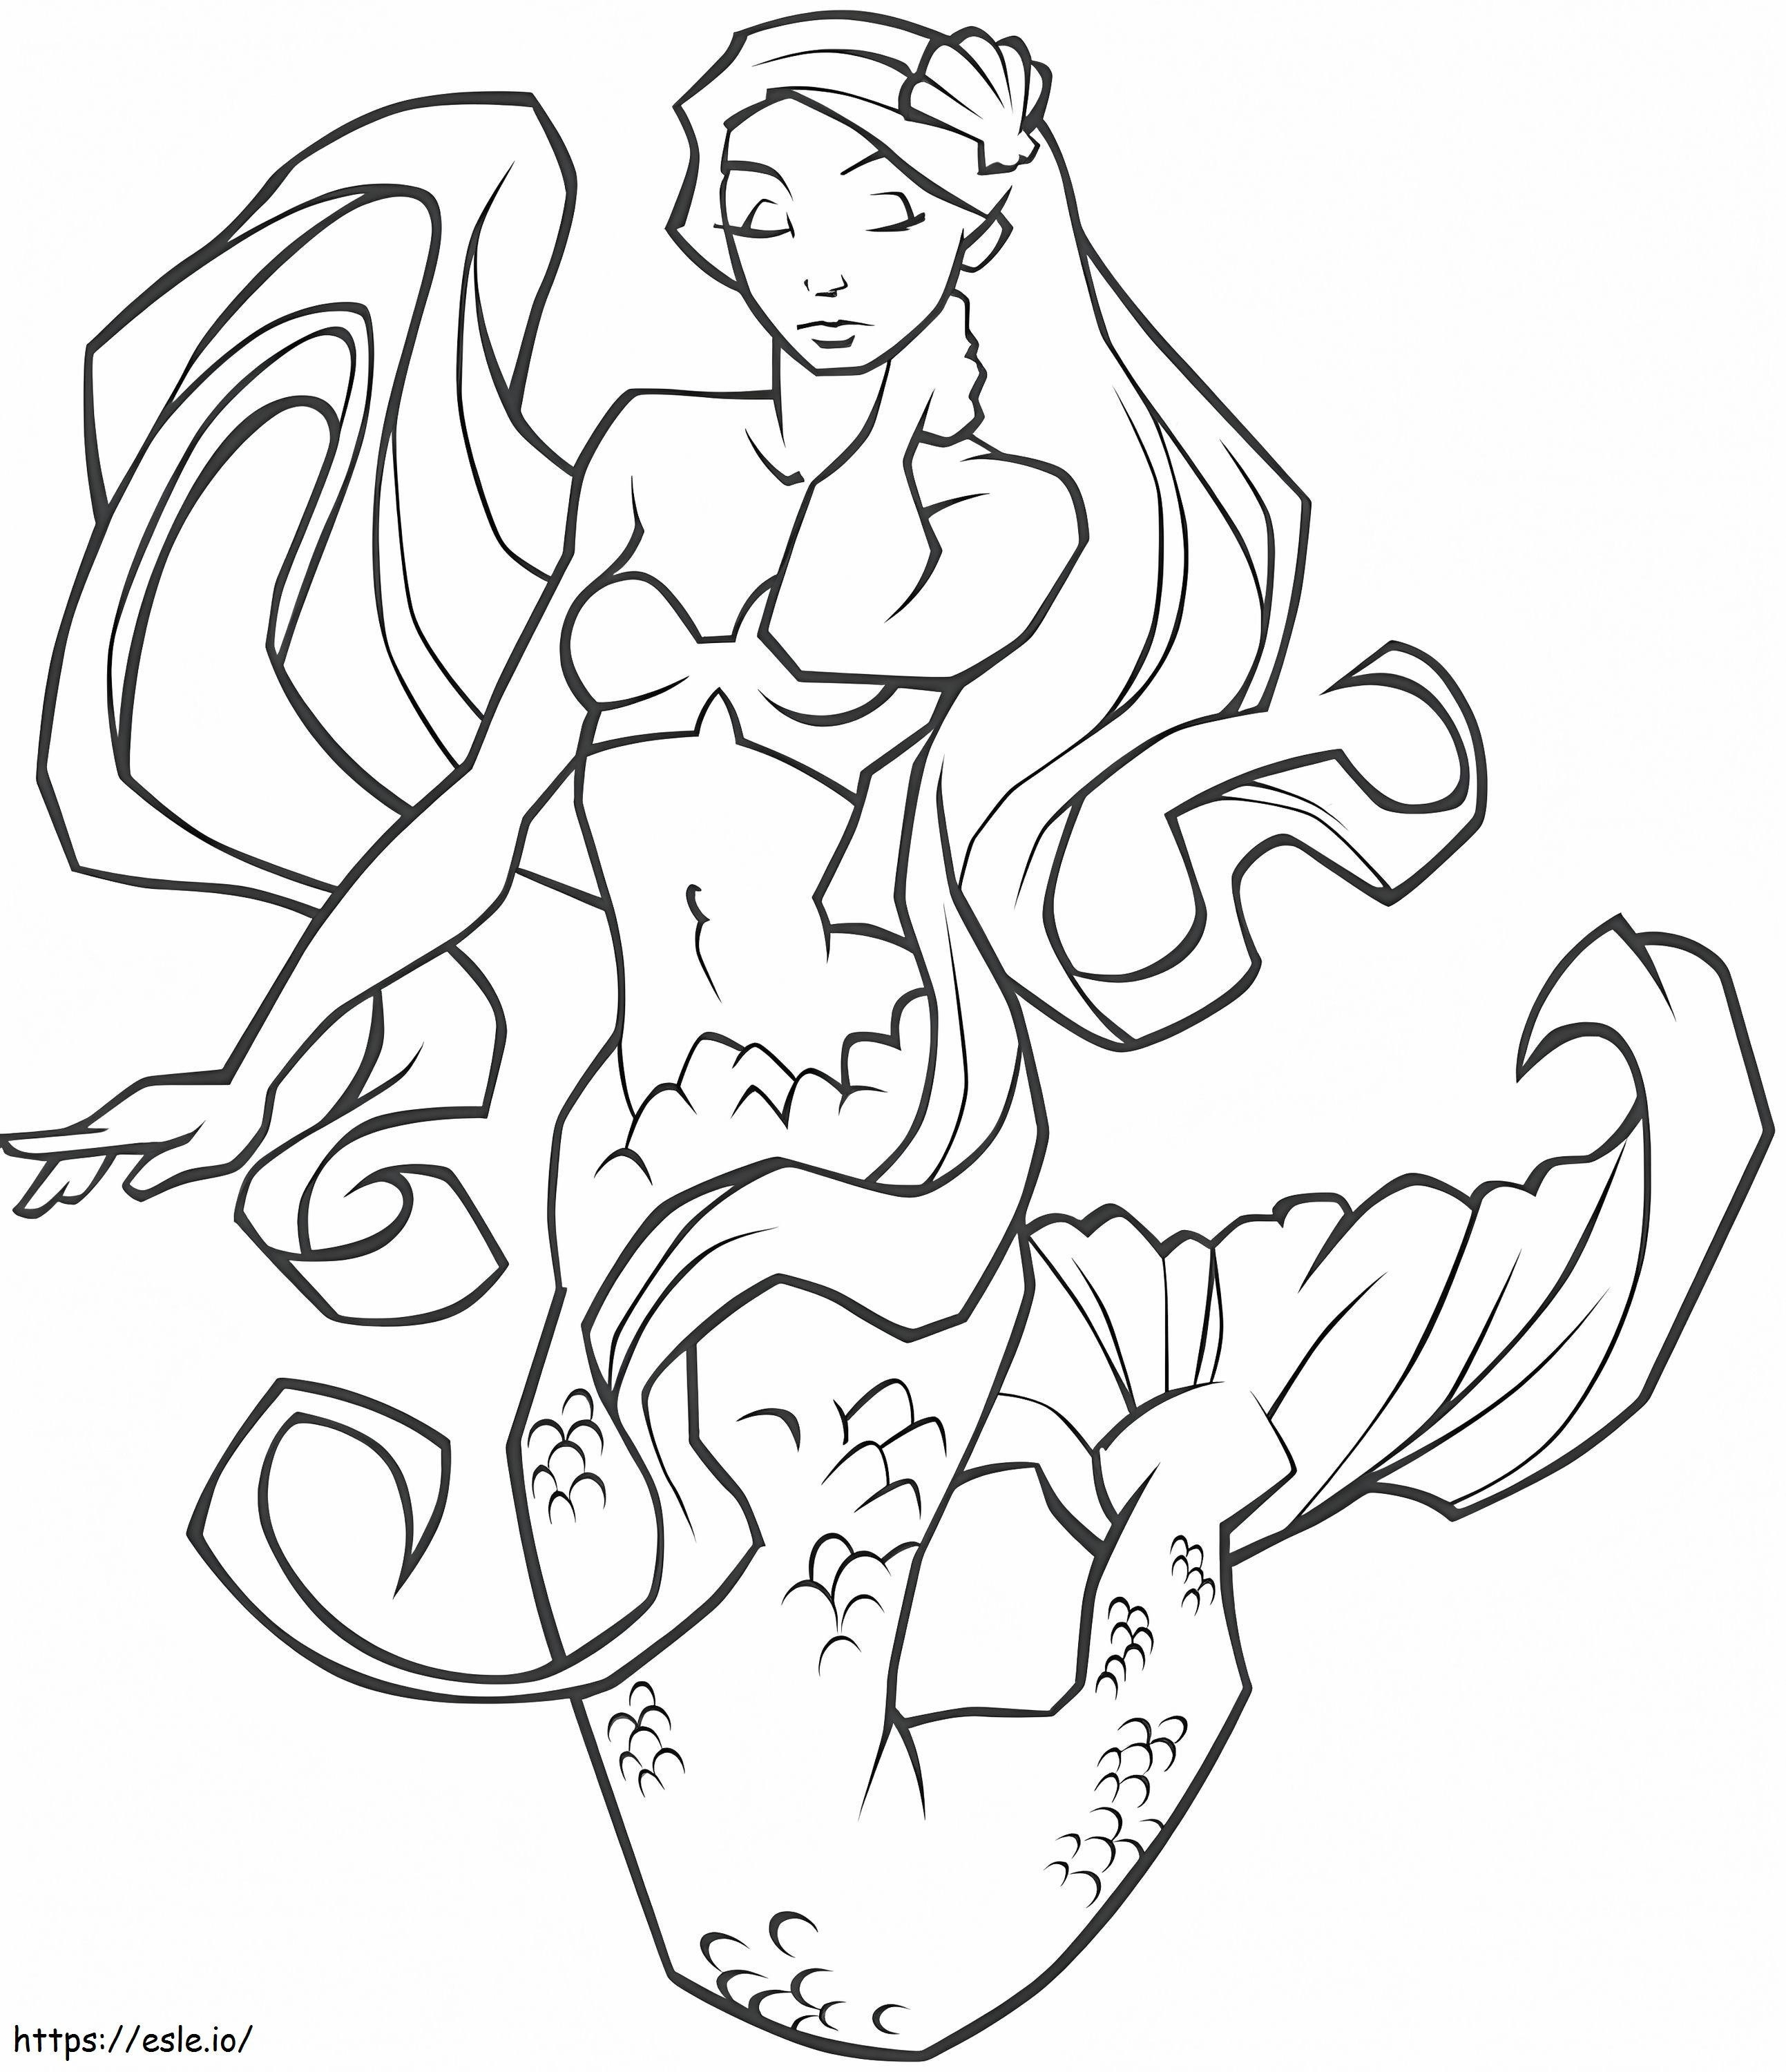 Glorious Mermaid coloring page